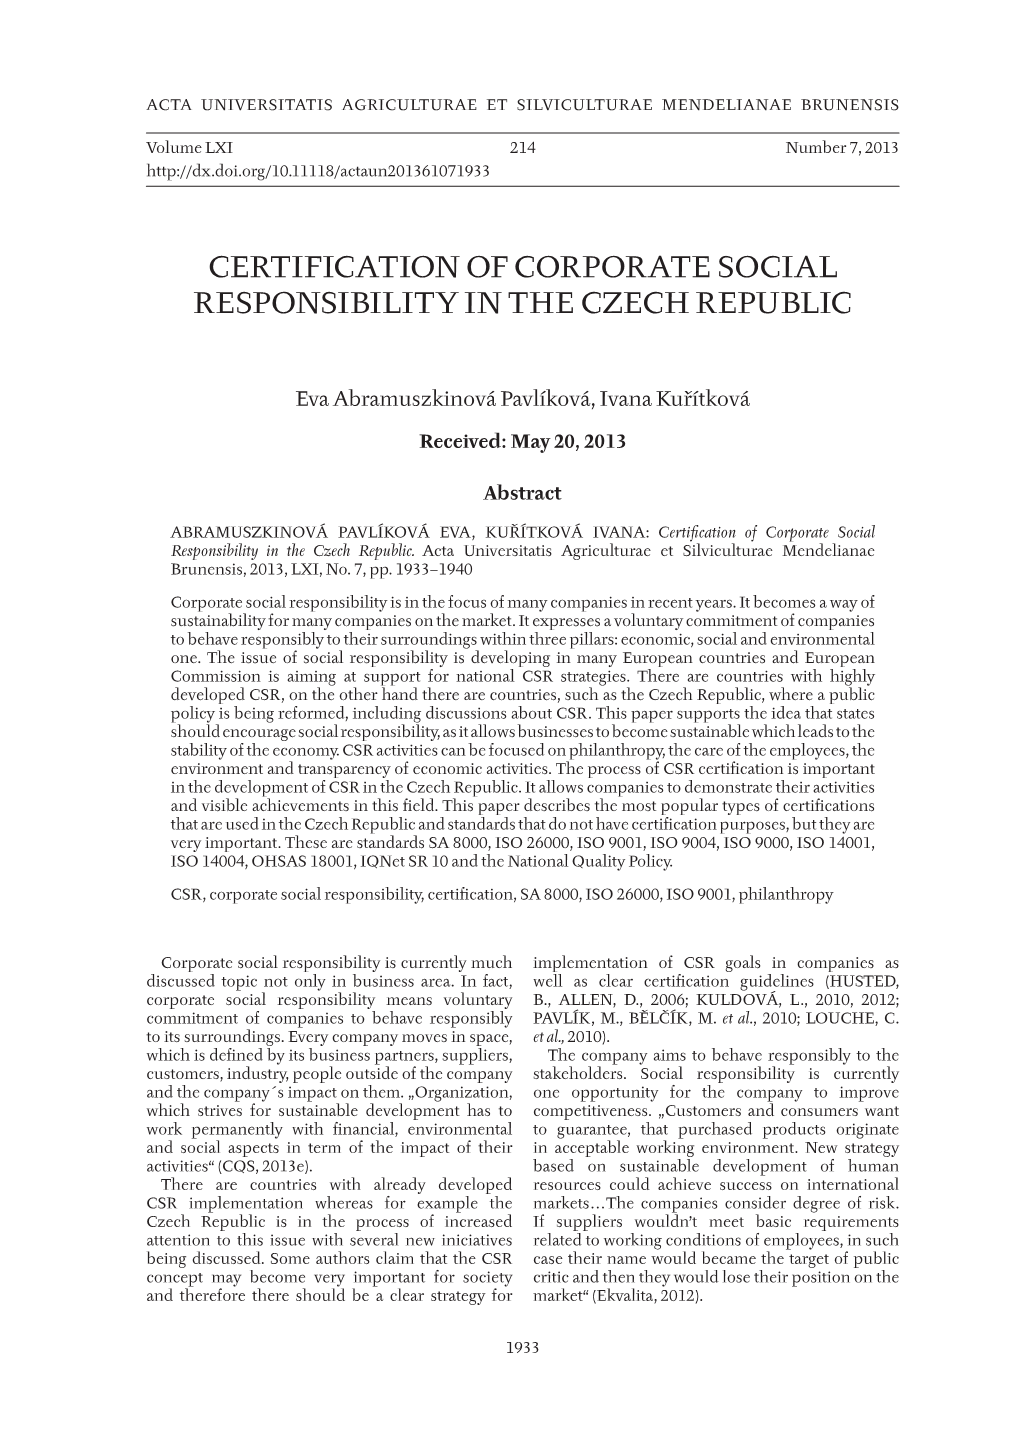 Certification of Corporate Social Responsibility in the Czech Republic